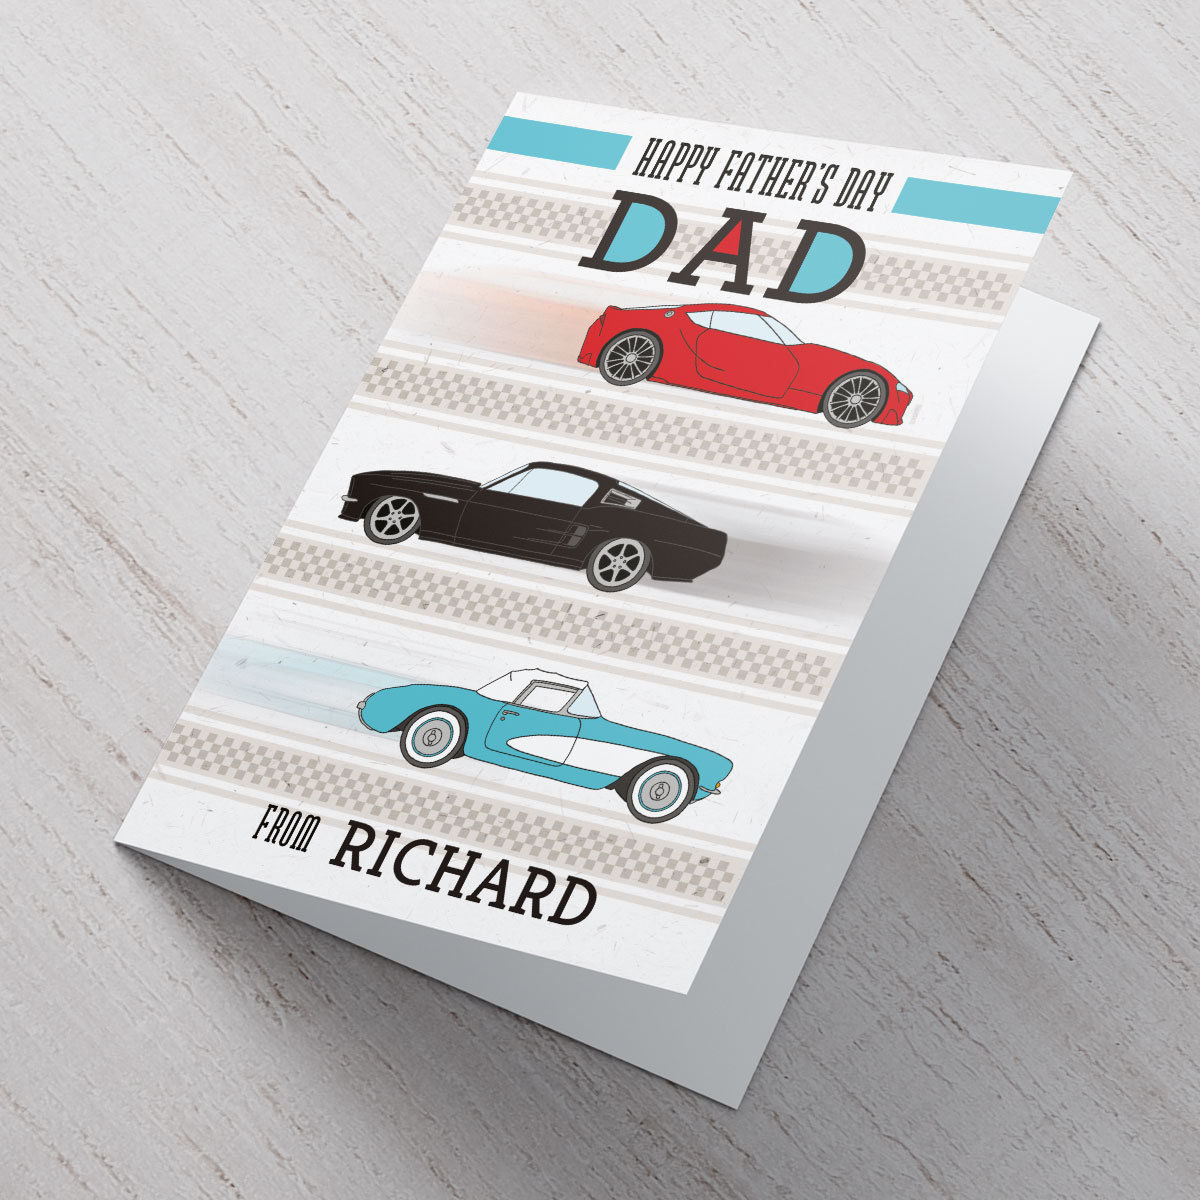 Personalised Father's Day Card - Dad Sports Cars